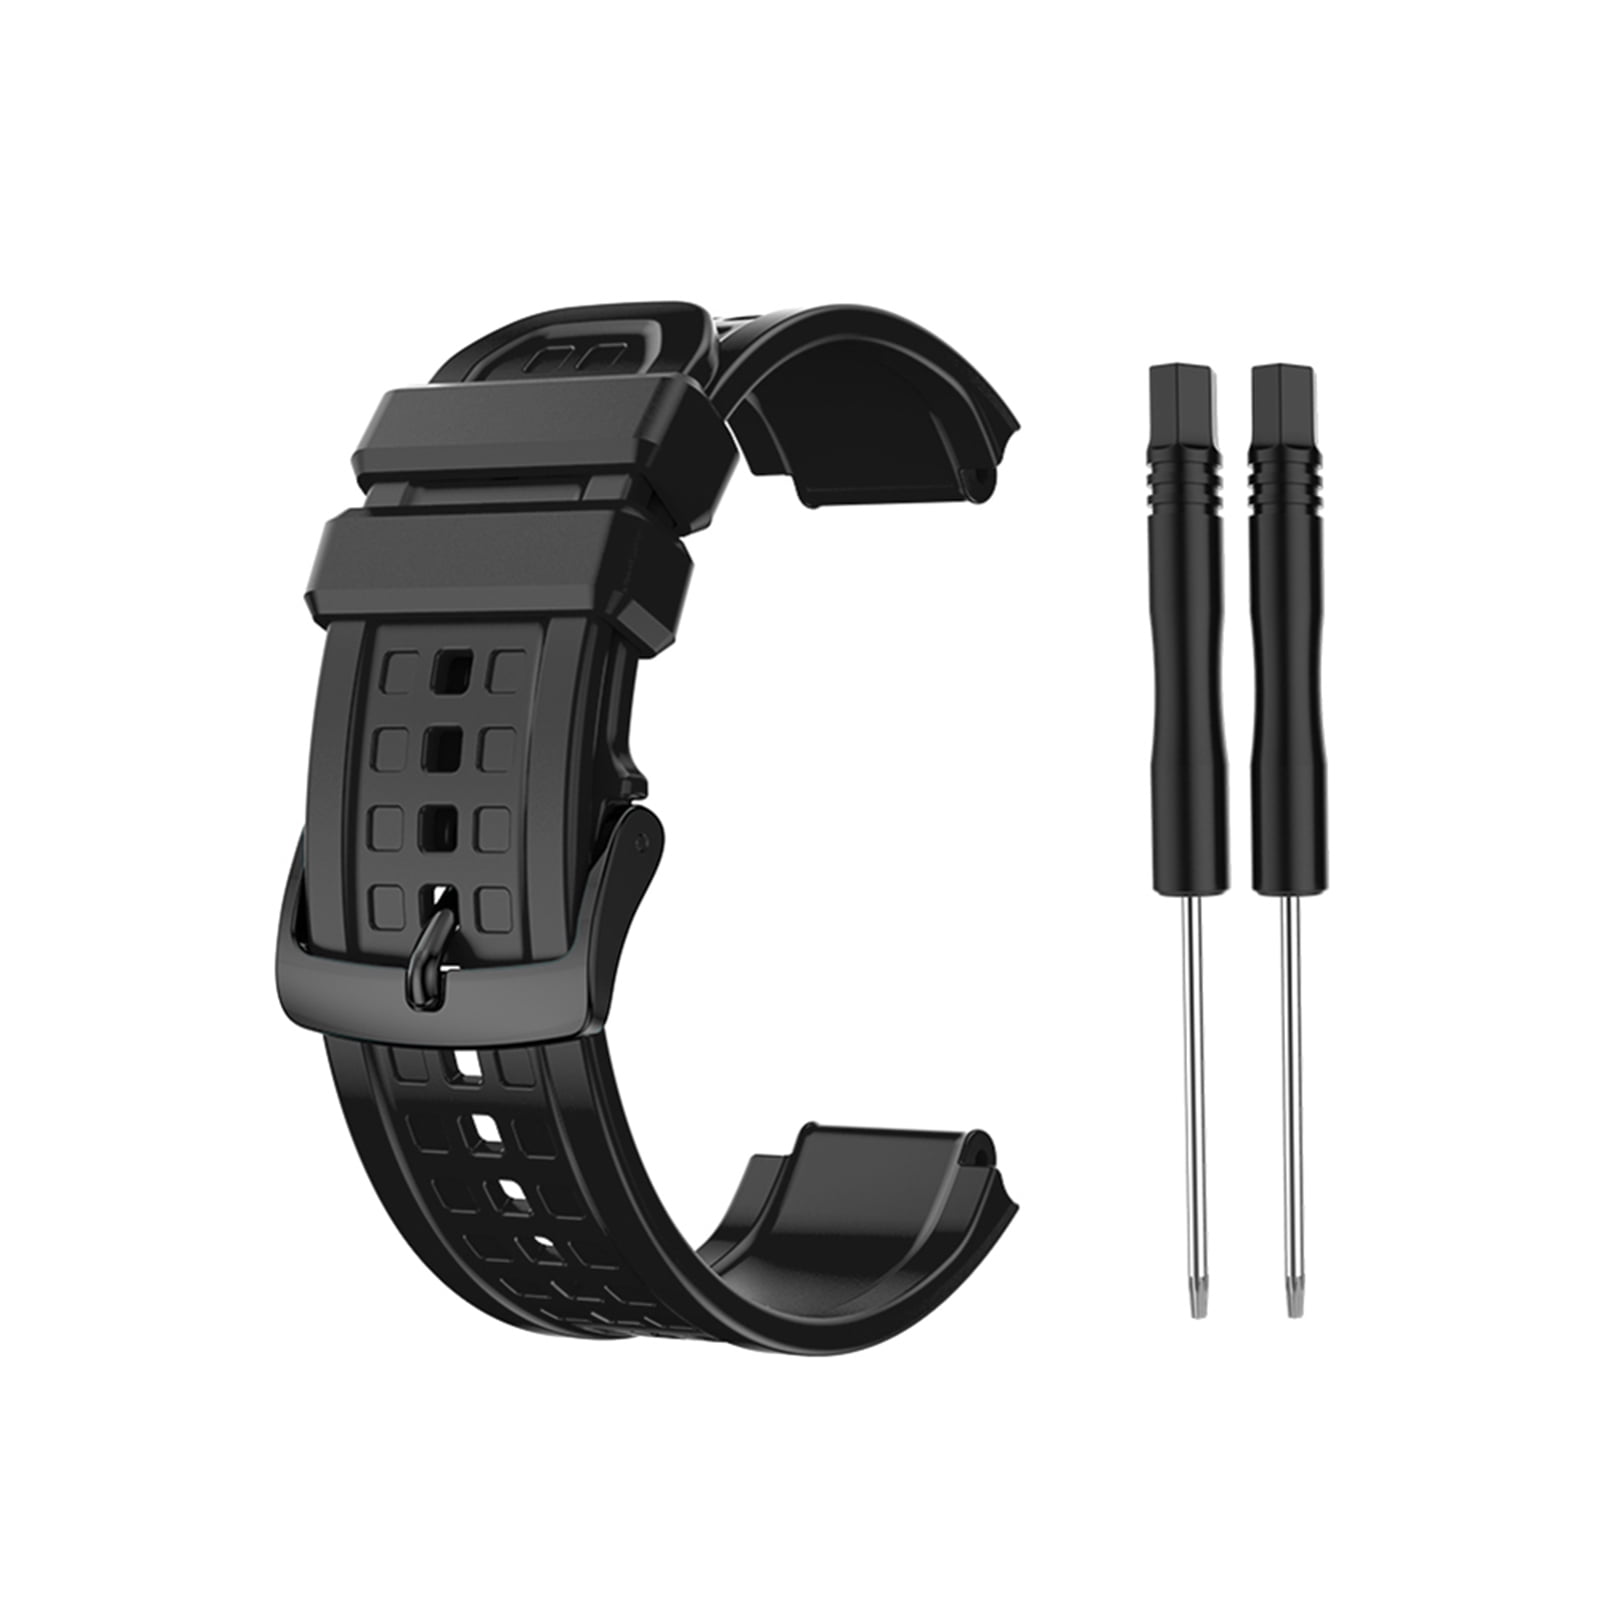 Silicone WatchBand Wrist Strap Tool Replacement For Garmin Forerunner 25 S/L 